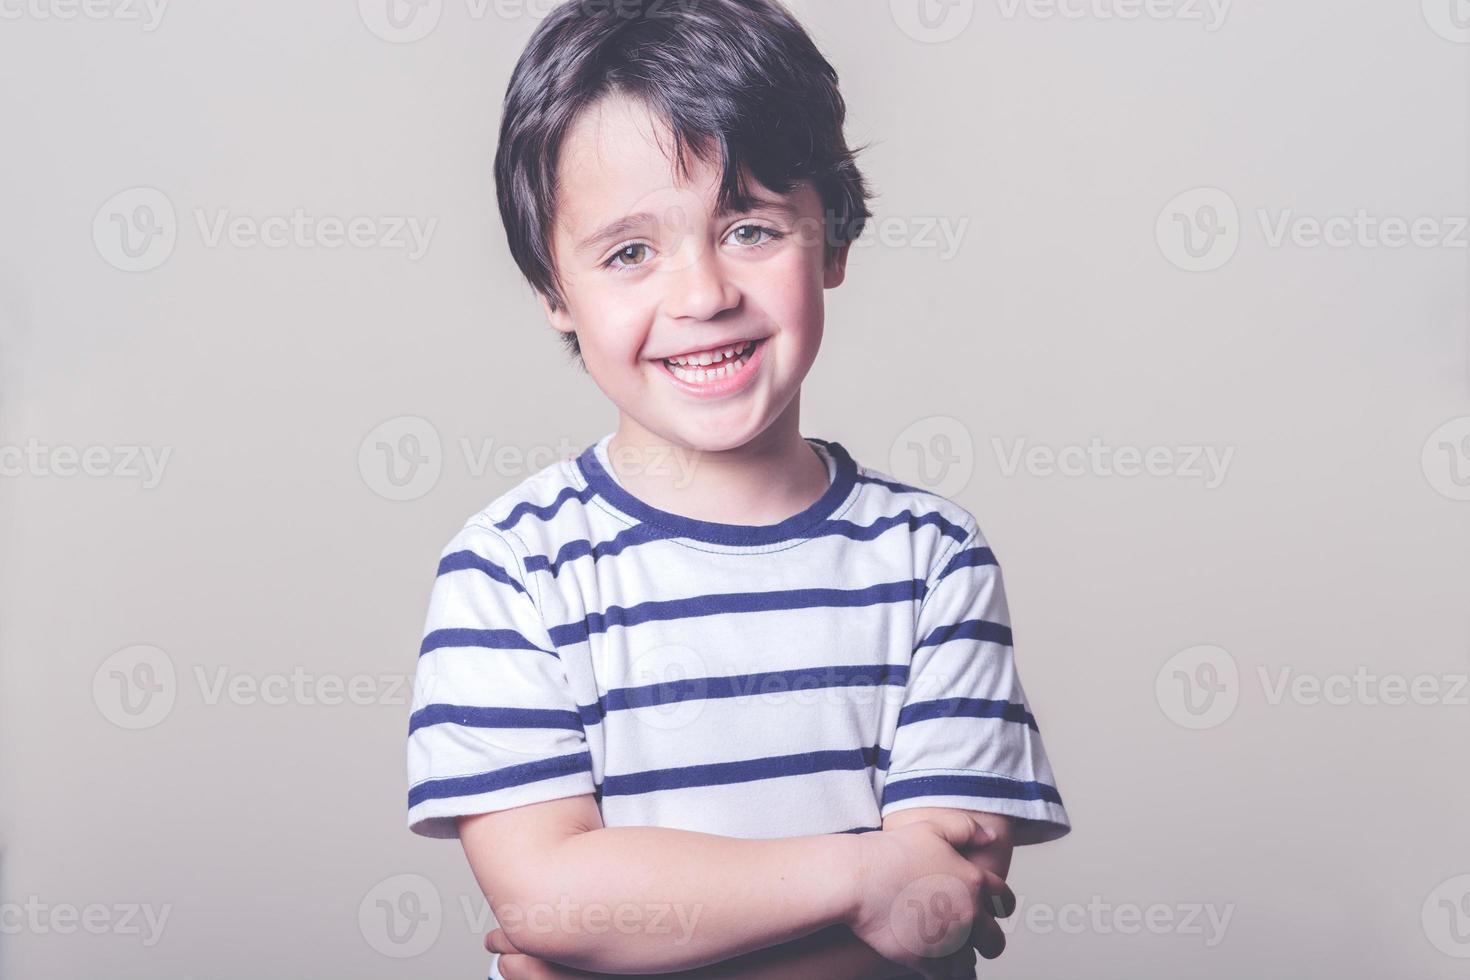 happy and smiling child photo